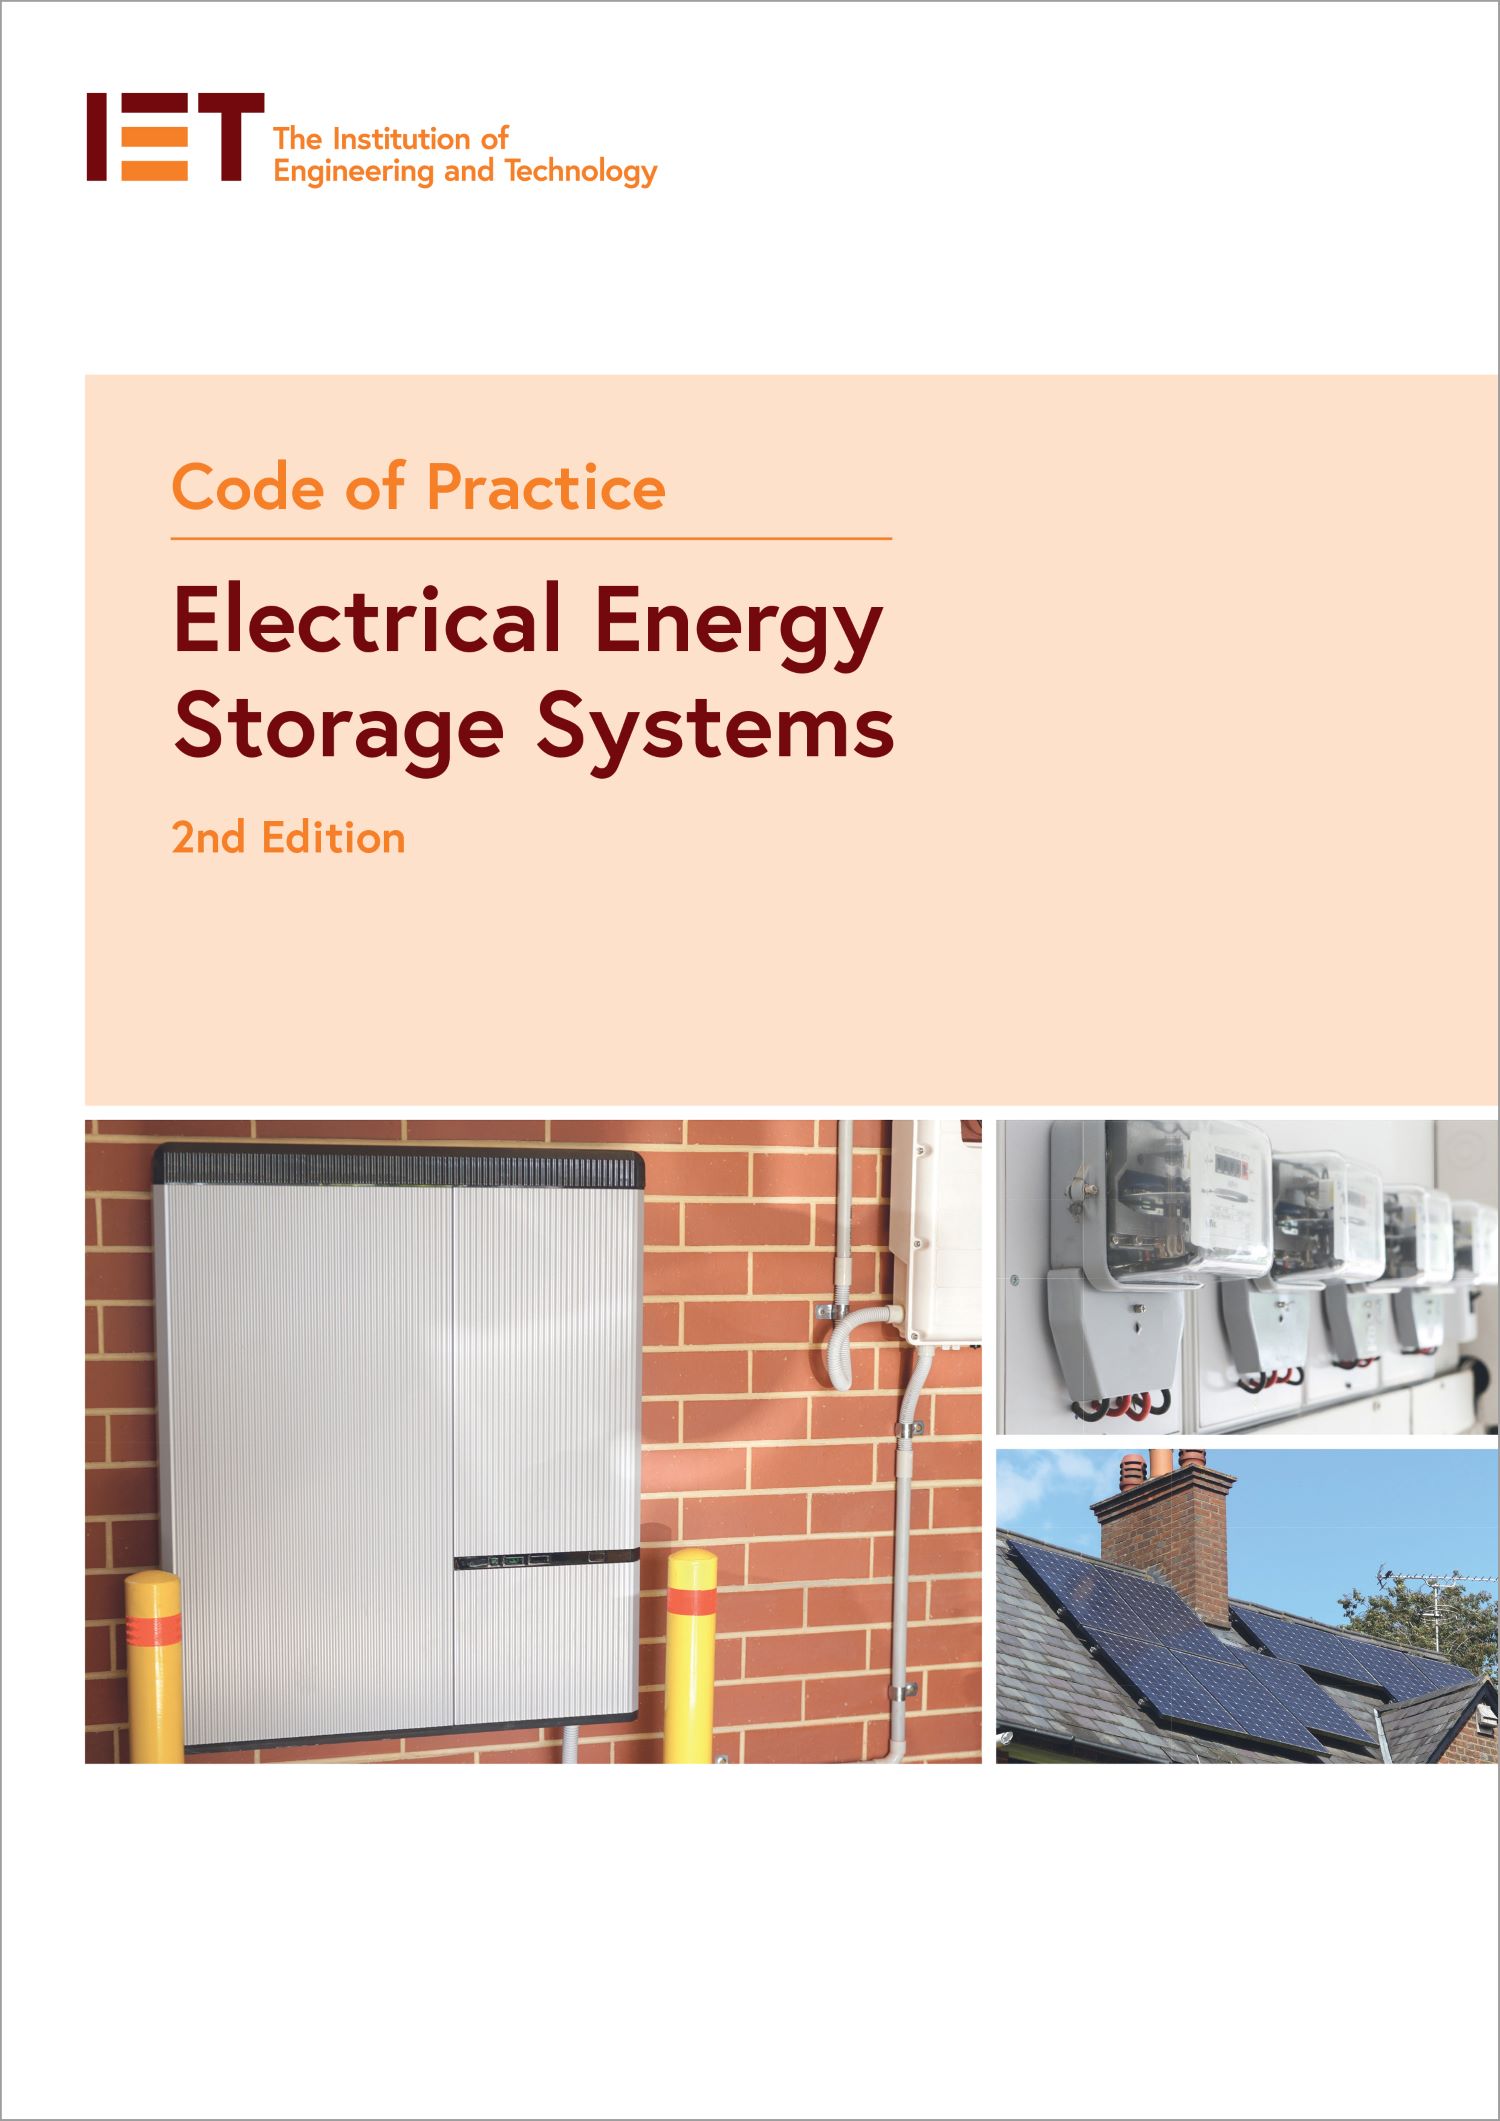 Code of Practice for Electrical Energy Storage Systems, 2nd Edition